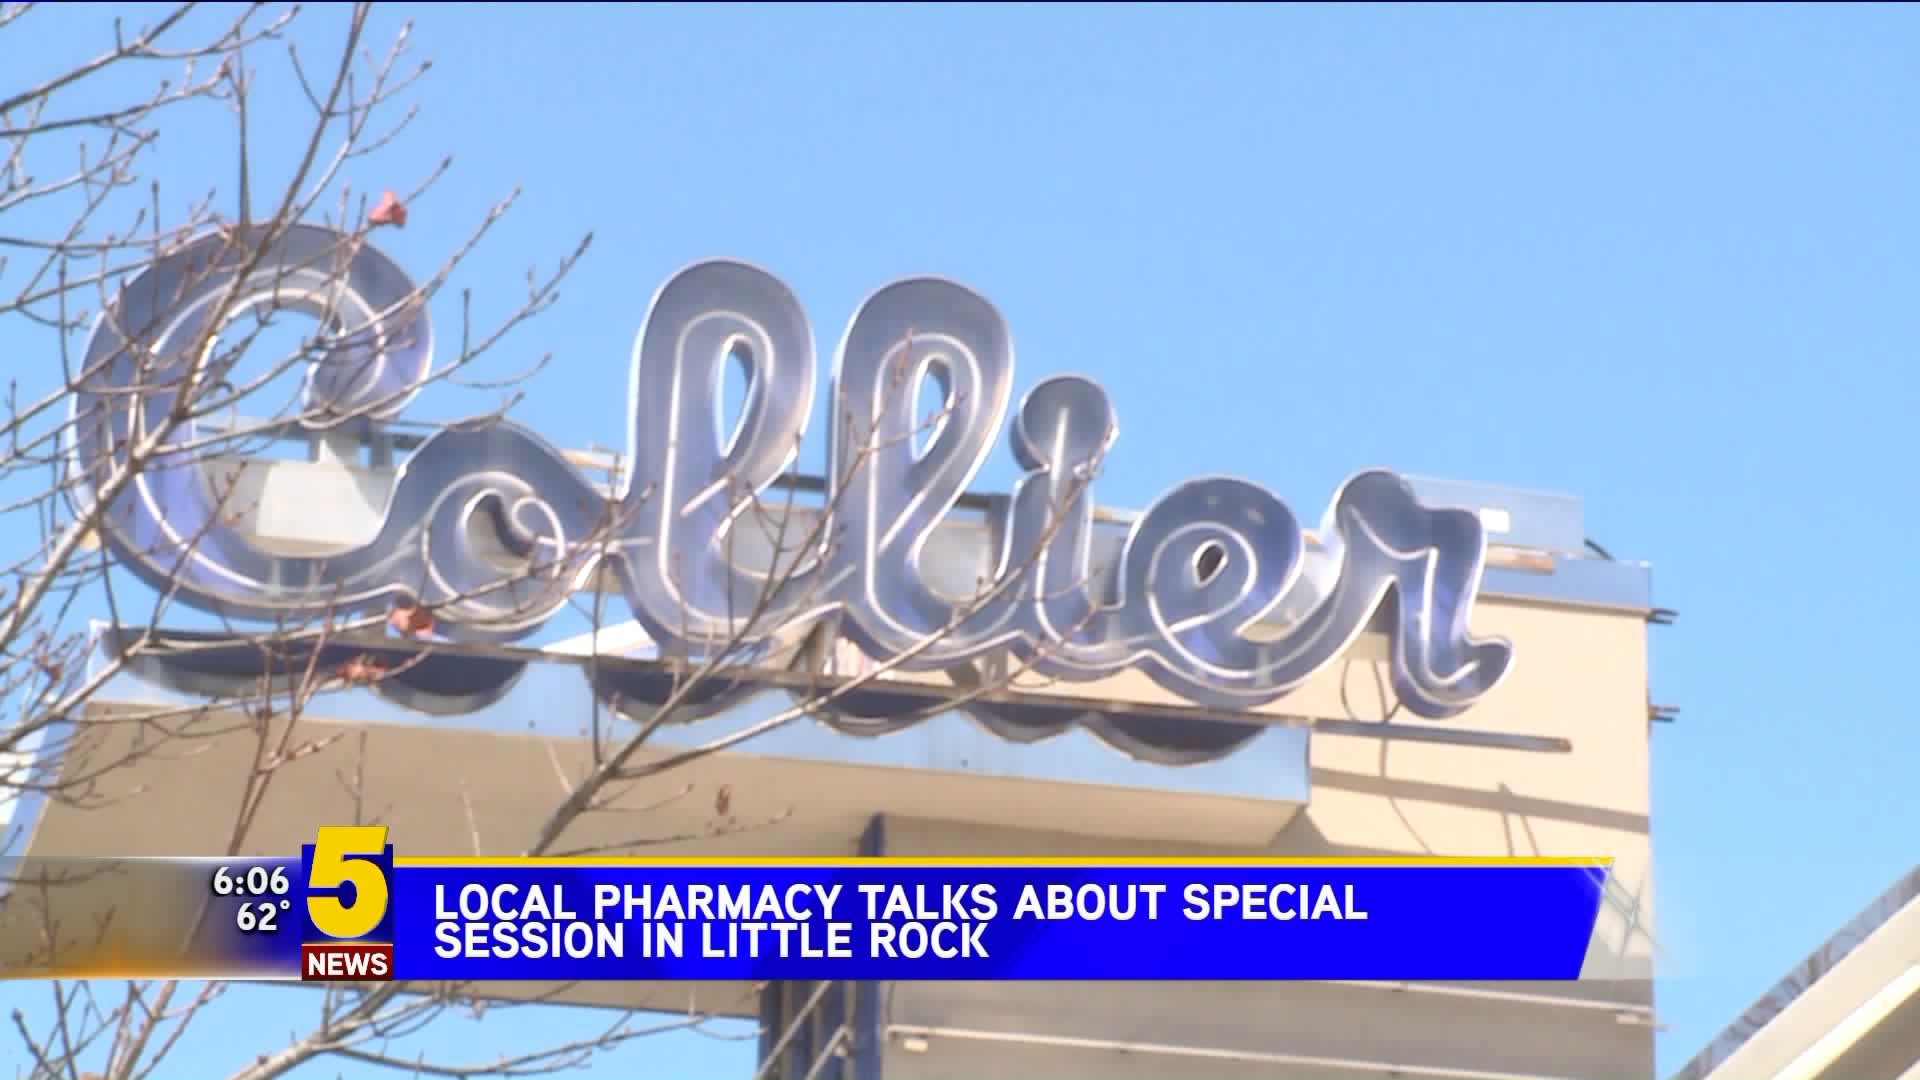 Local Pharmacy Talks About Special Session In Little Rock